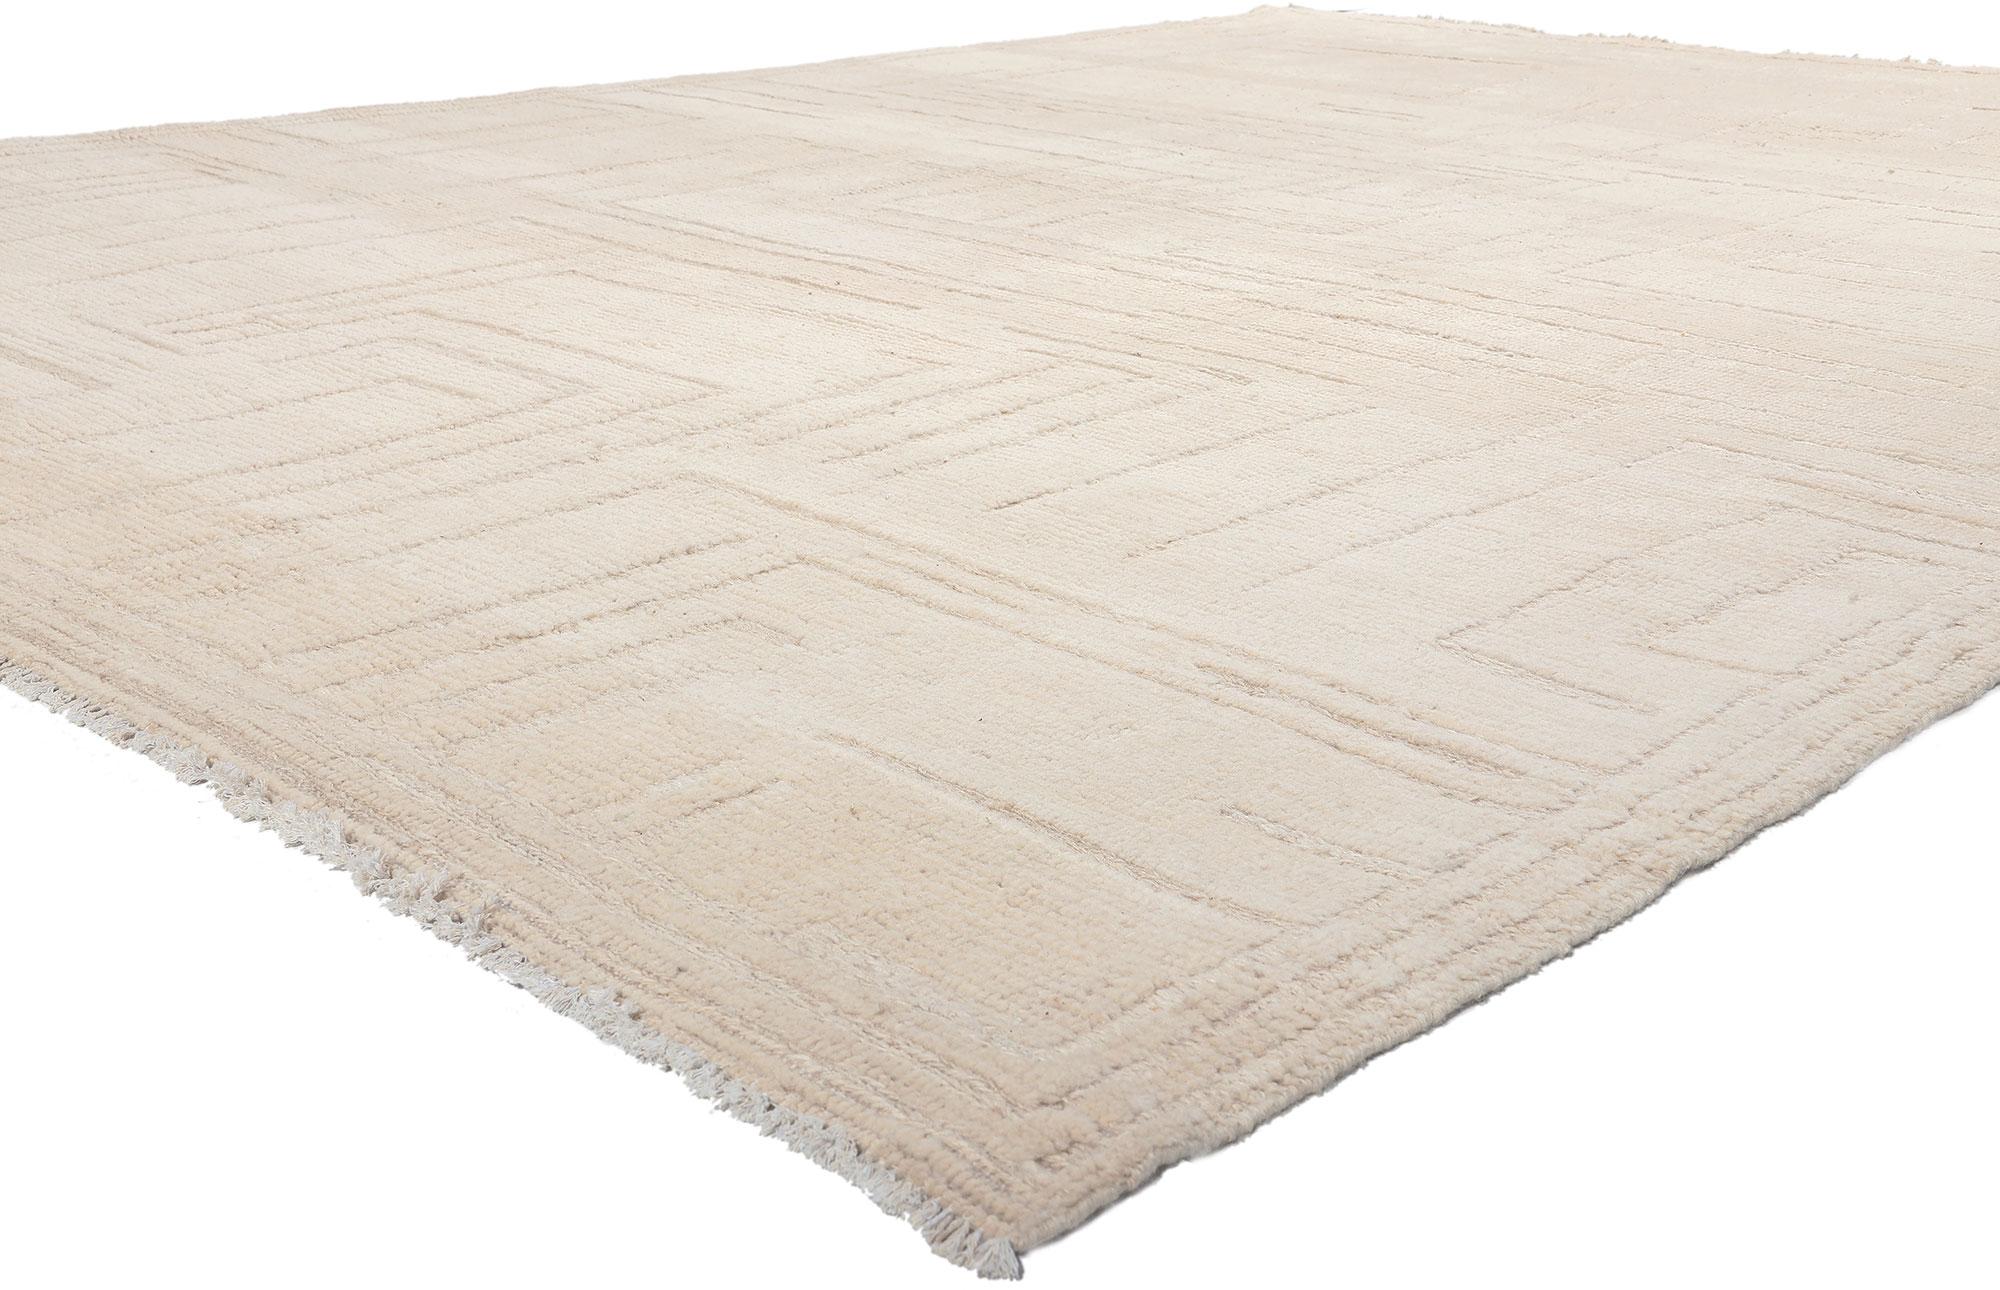 81006 New Modern Style Neutral Moroccan Area Rug, 10'01 x 13'06. Reflecting elements of Shibui with incredible detail and texture, this hand knotted wool Moroccan area rug is simple, subtle, and a captivating vision of woven beauty. The zen-like